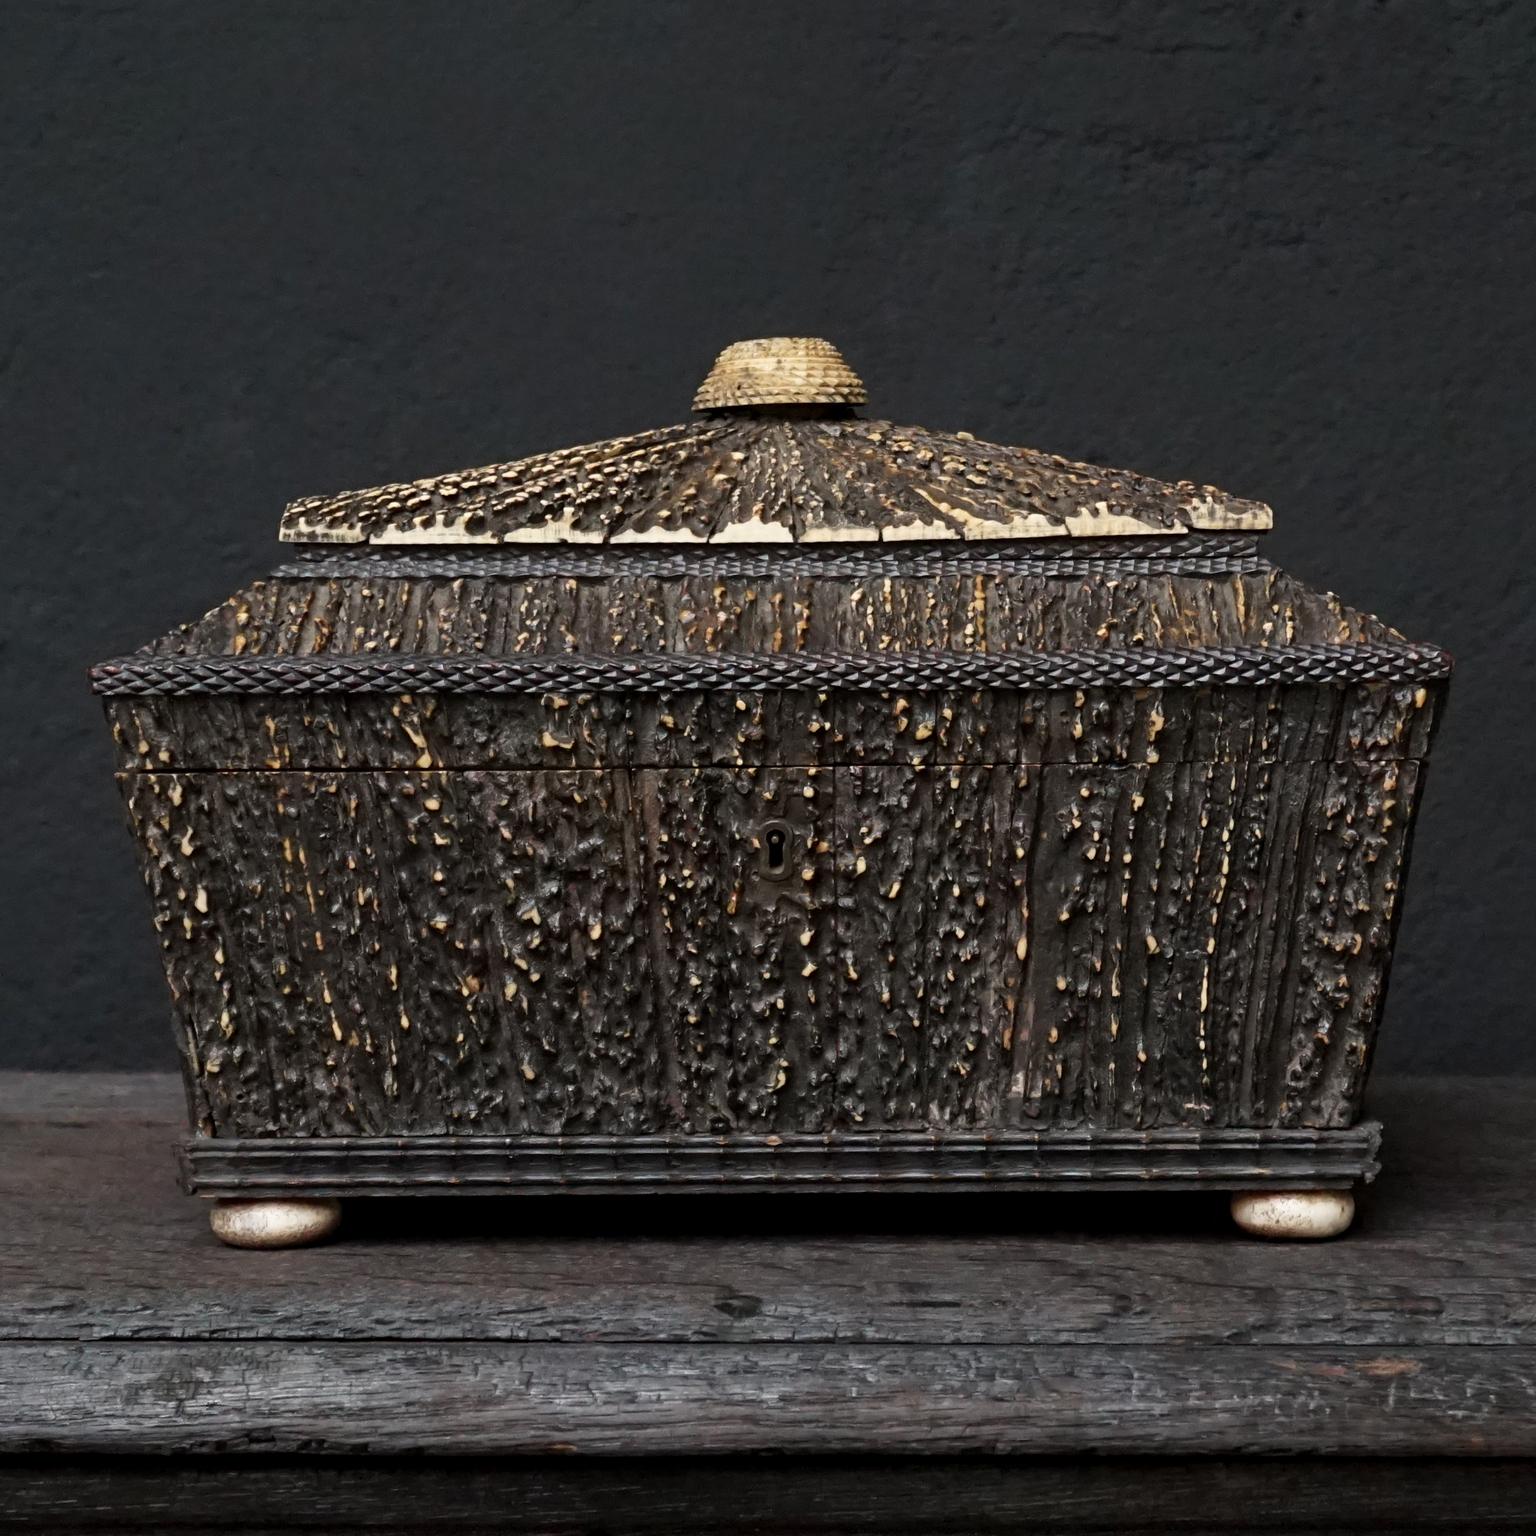 Very heavy and decorative mid-19th century Anglo-Indian sewing box made in Vizagapatam, India, circa 1860.
The box is made of sandalwood but covered in sections of carved antler horn and bone.
With working key and lock.

Anglo-Indian boxes were